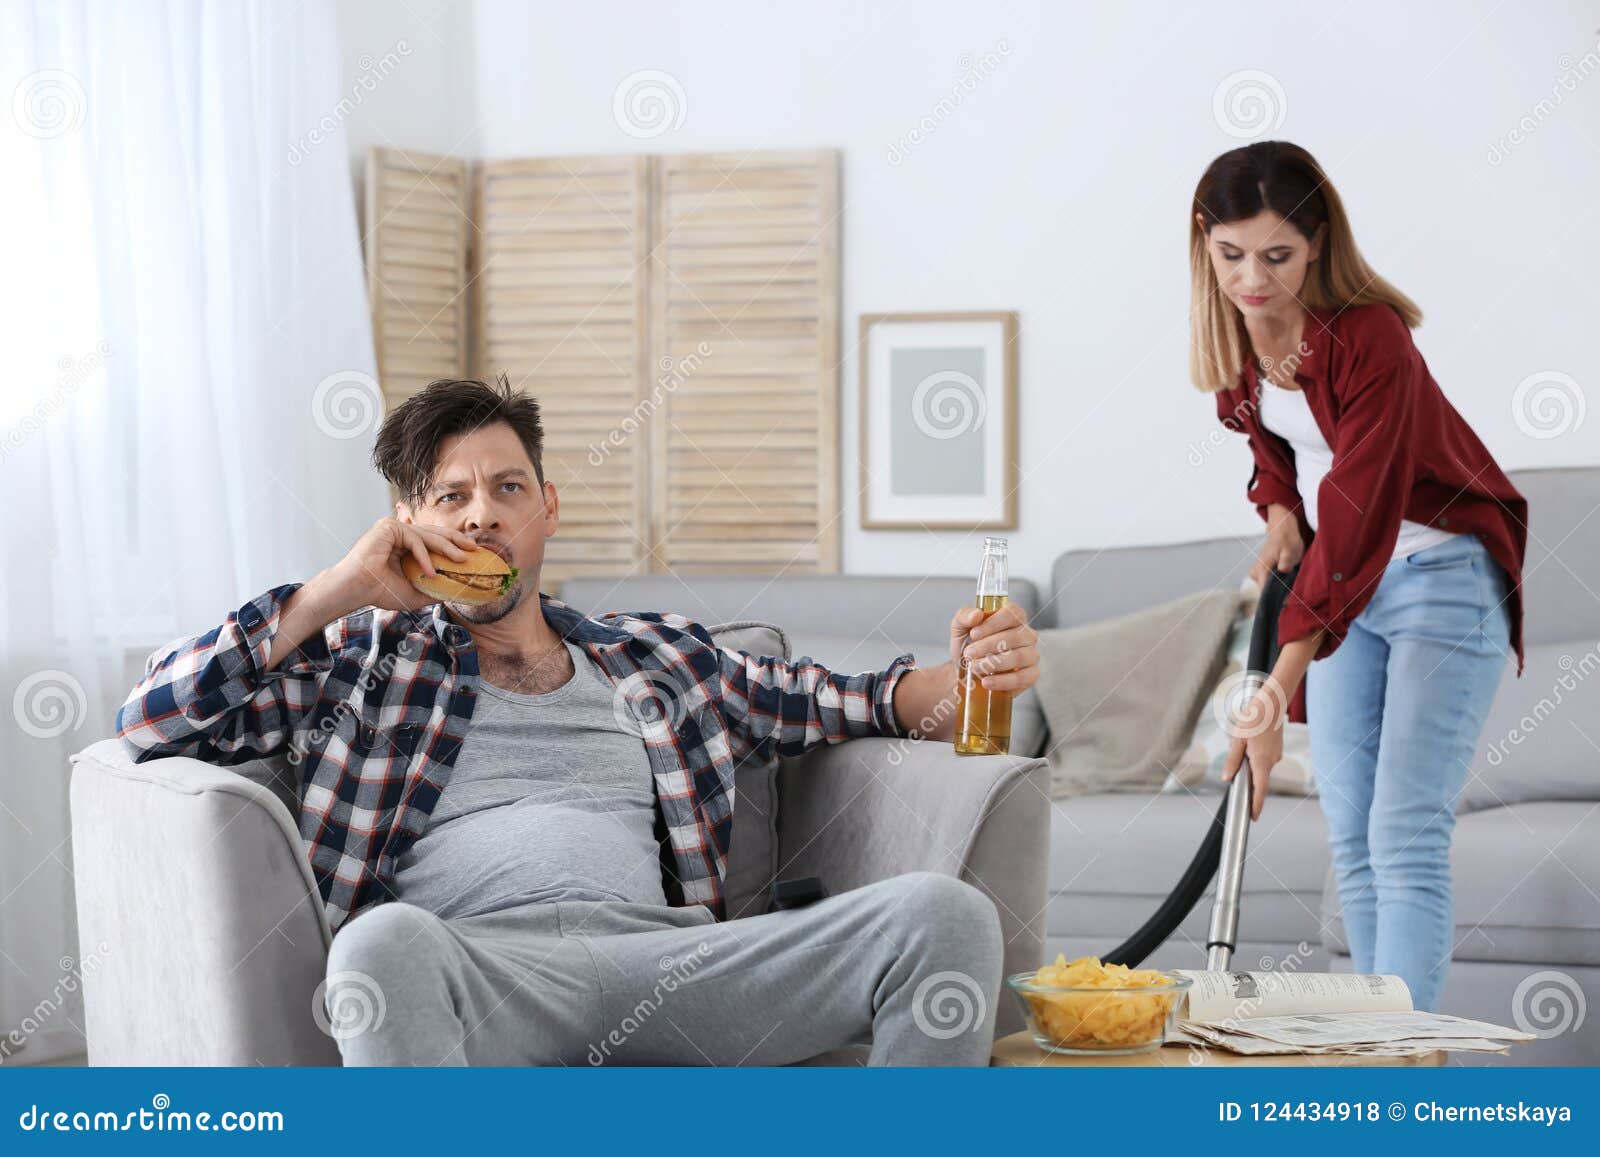 Husband Watches His Wife Telegraph 